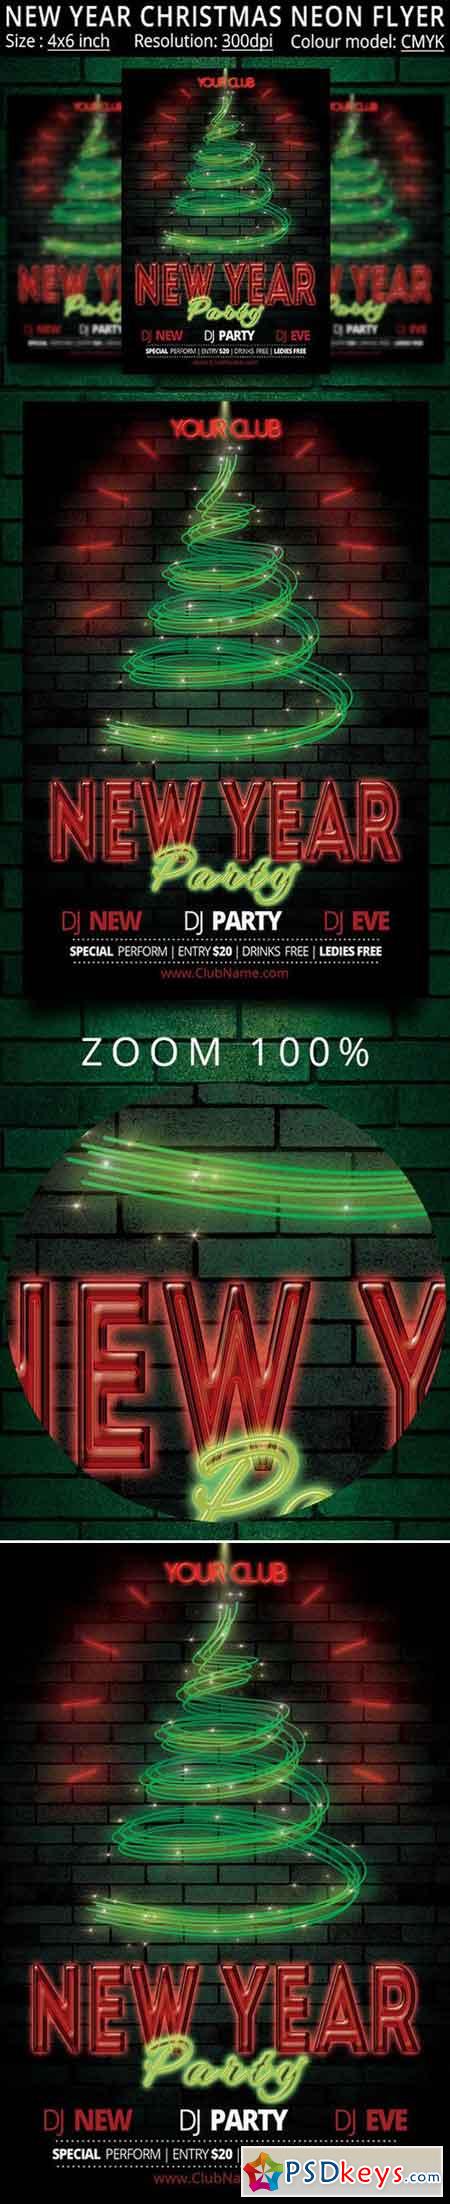 New Year Christmas Neon Party Flyer 463755